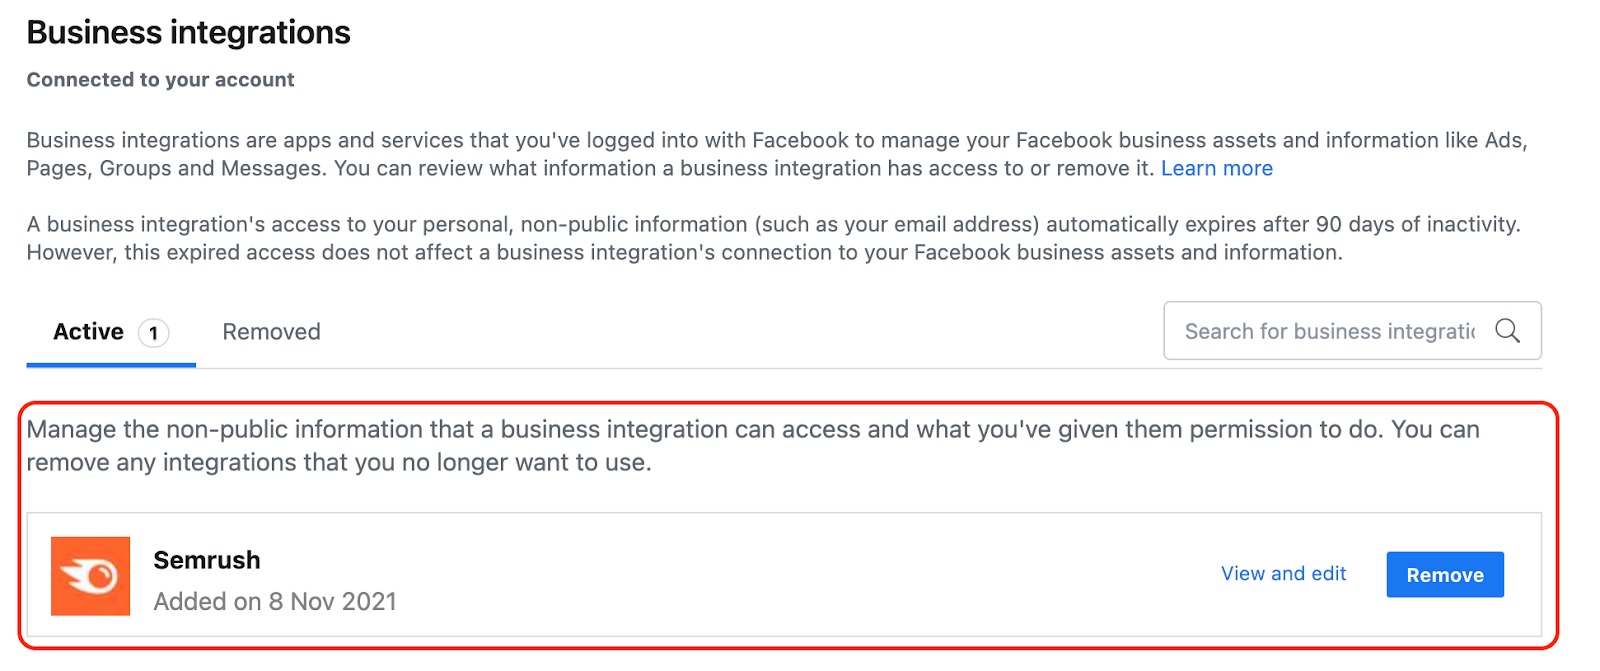 Facebook Business Integrations menu with Semrush added as an active integration. 